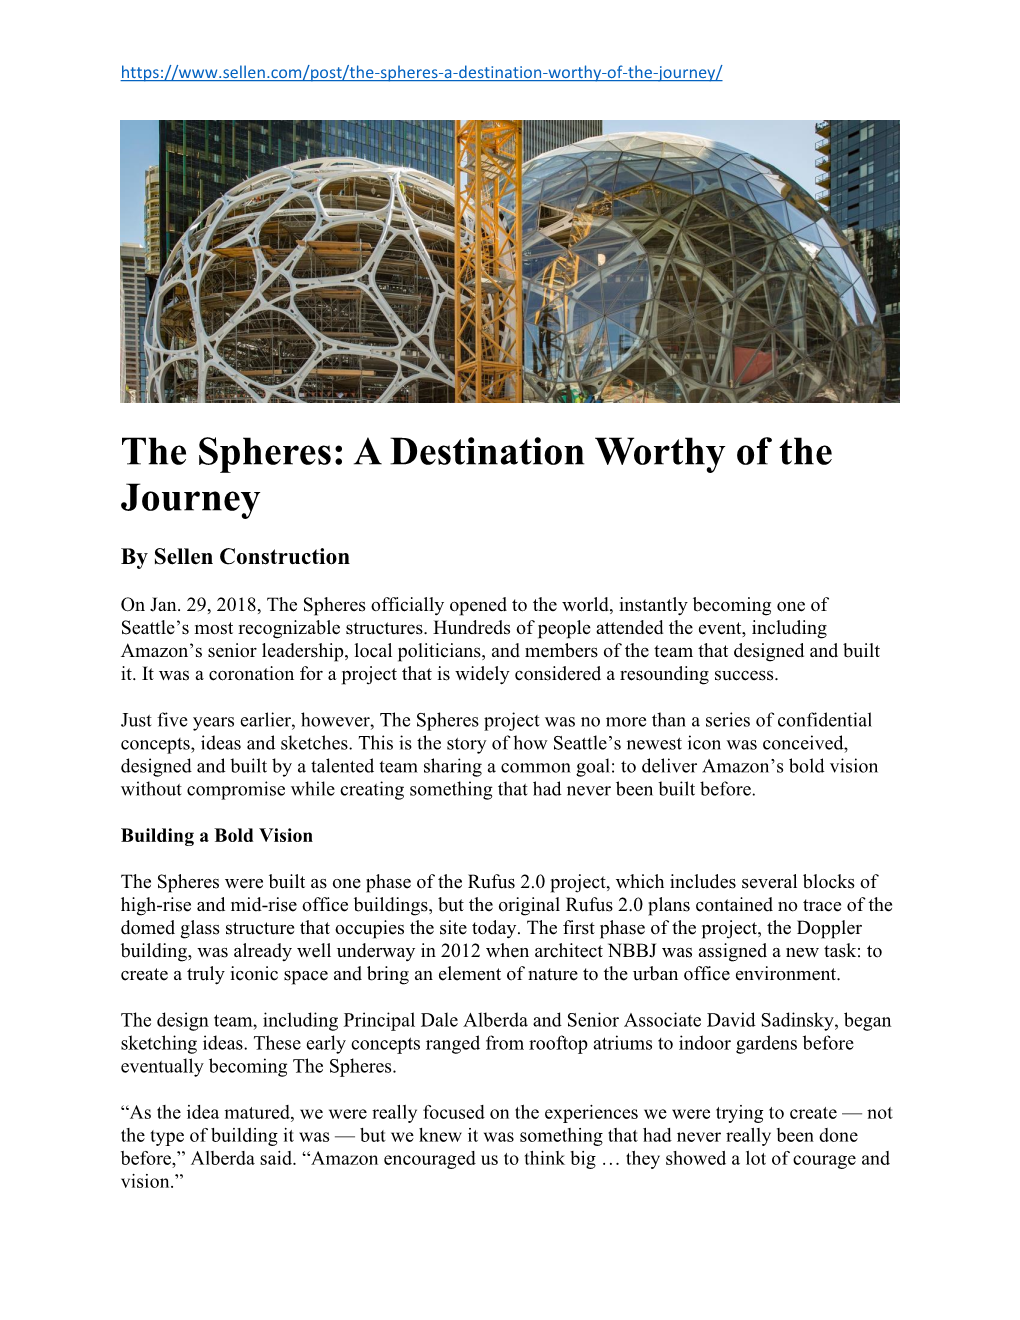 The Spheres: a Destination Worthy of the Journey